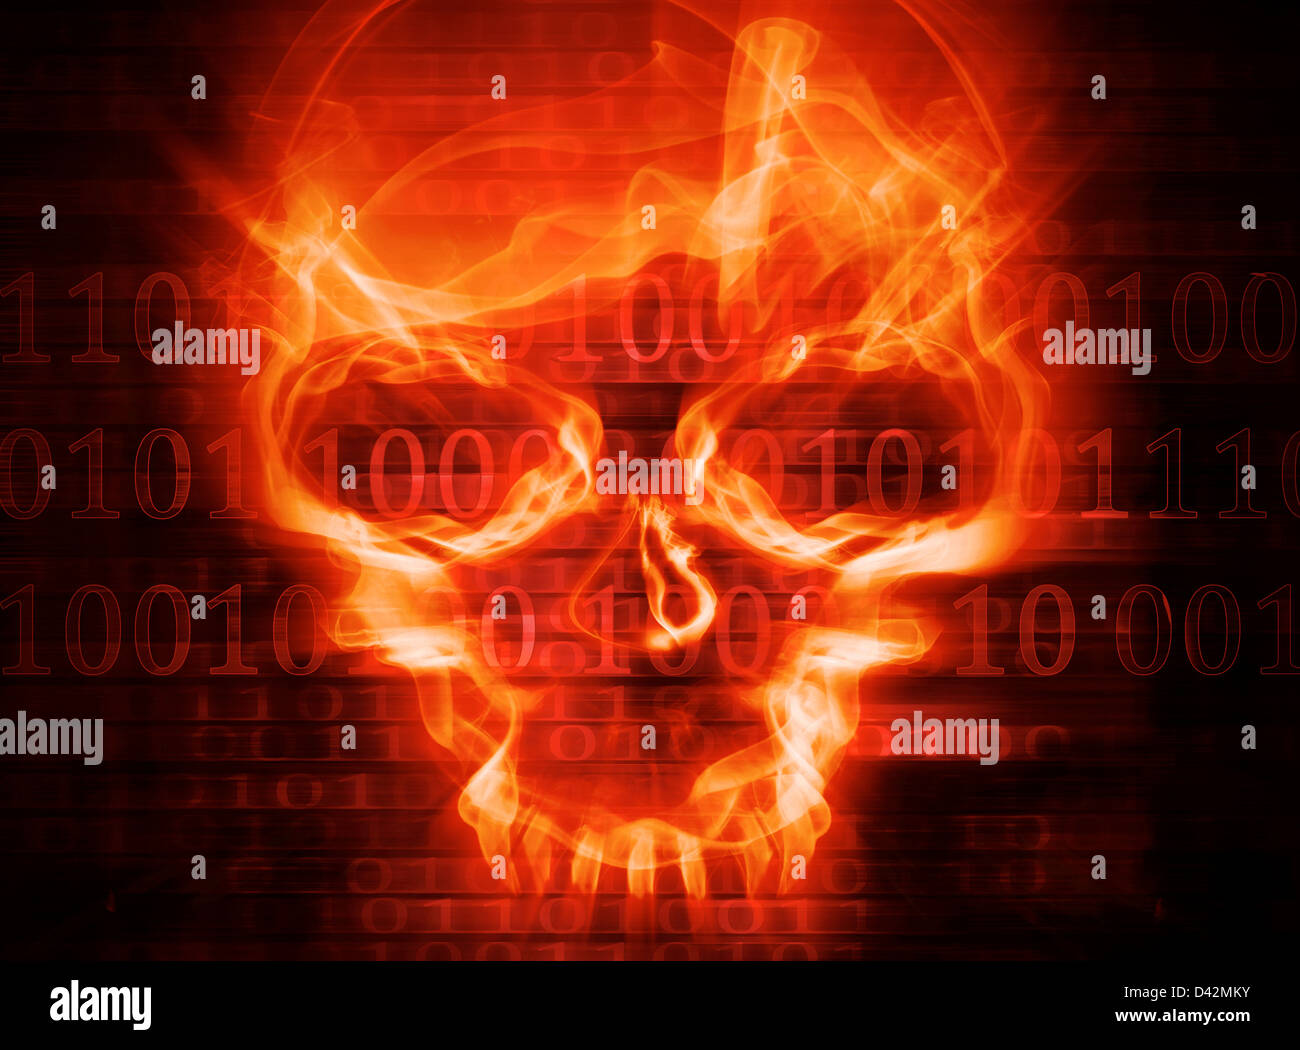 hacker attack concept background Stock Photo